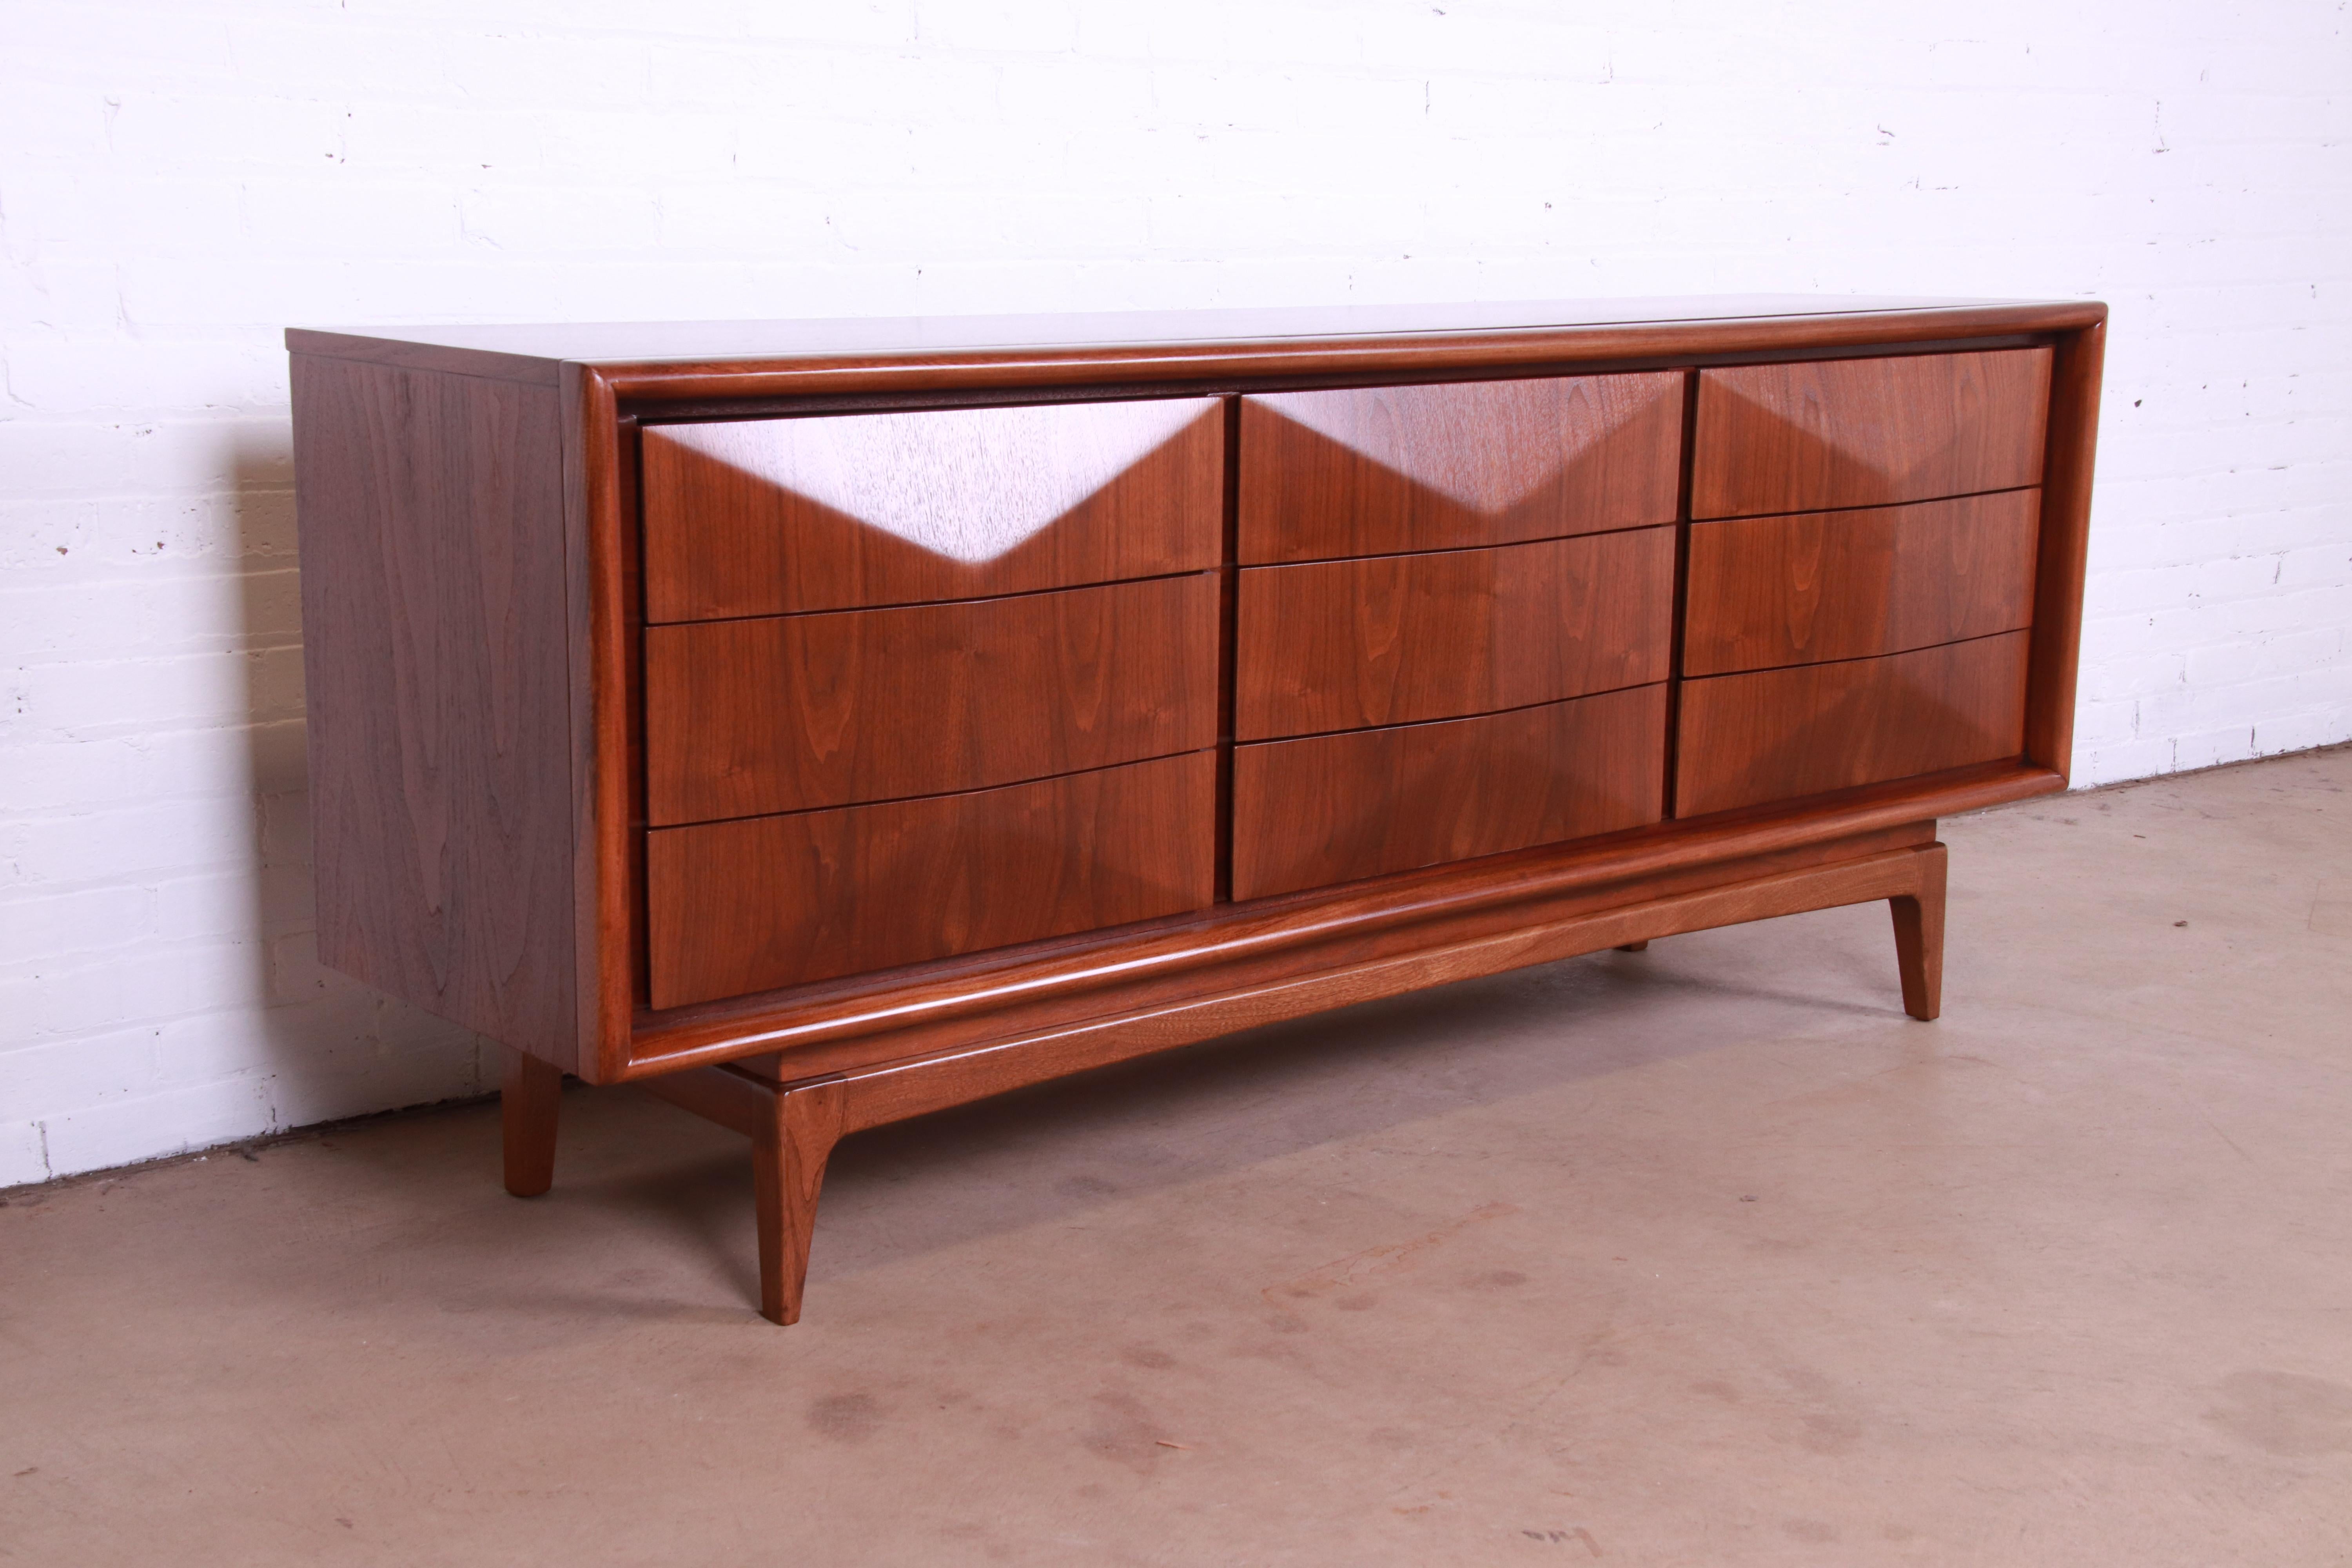 Mid-20th Century Mid-Century Modern Sculpted Walnut Diamond Front Dresser by United, Refinished